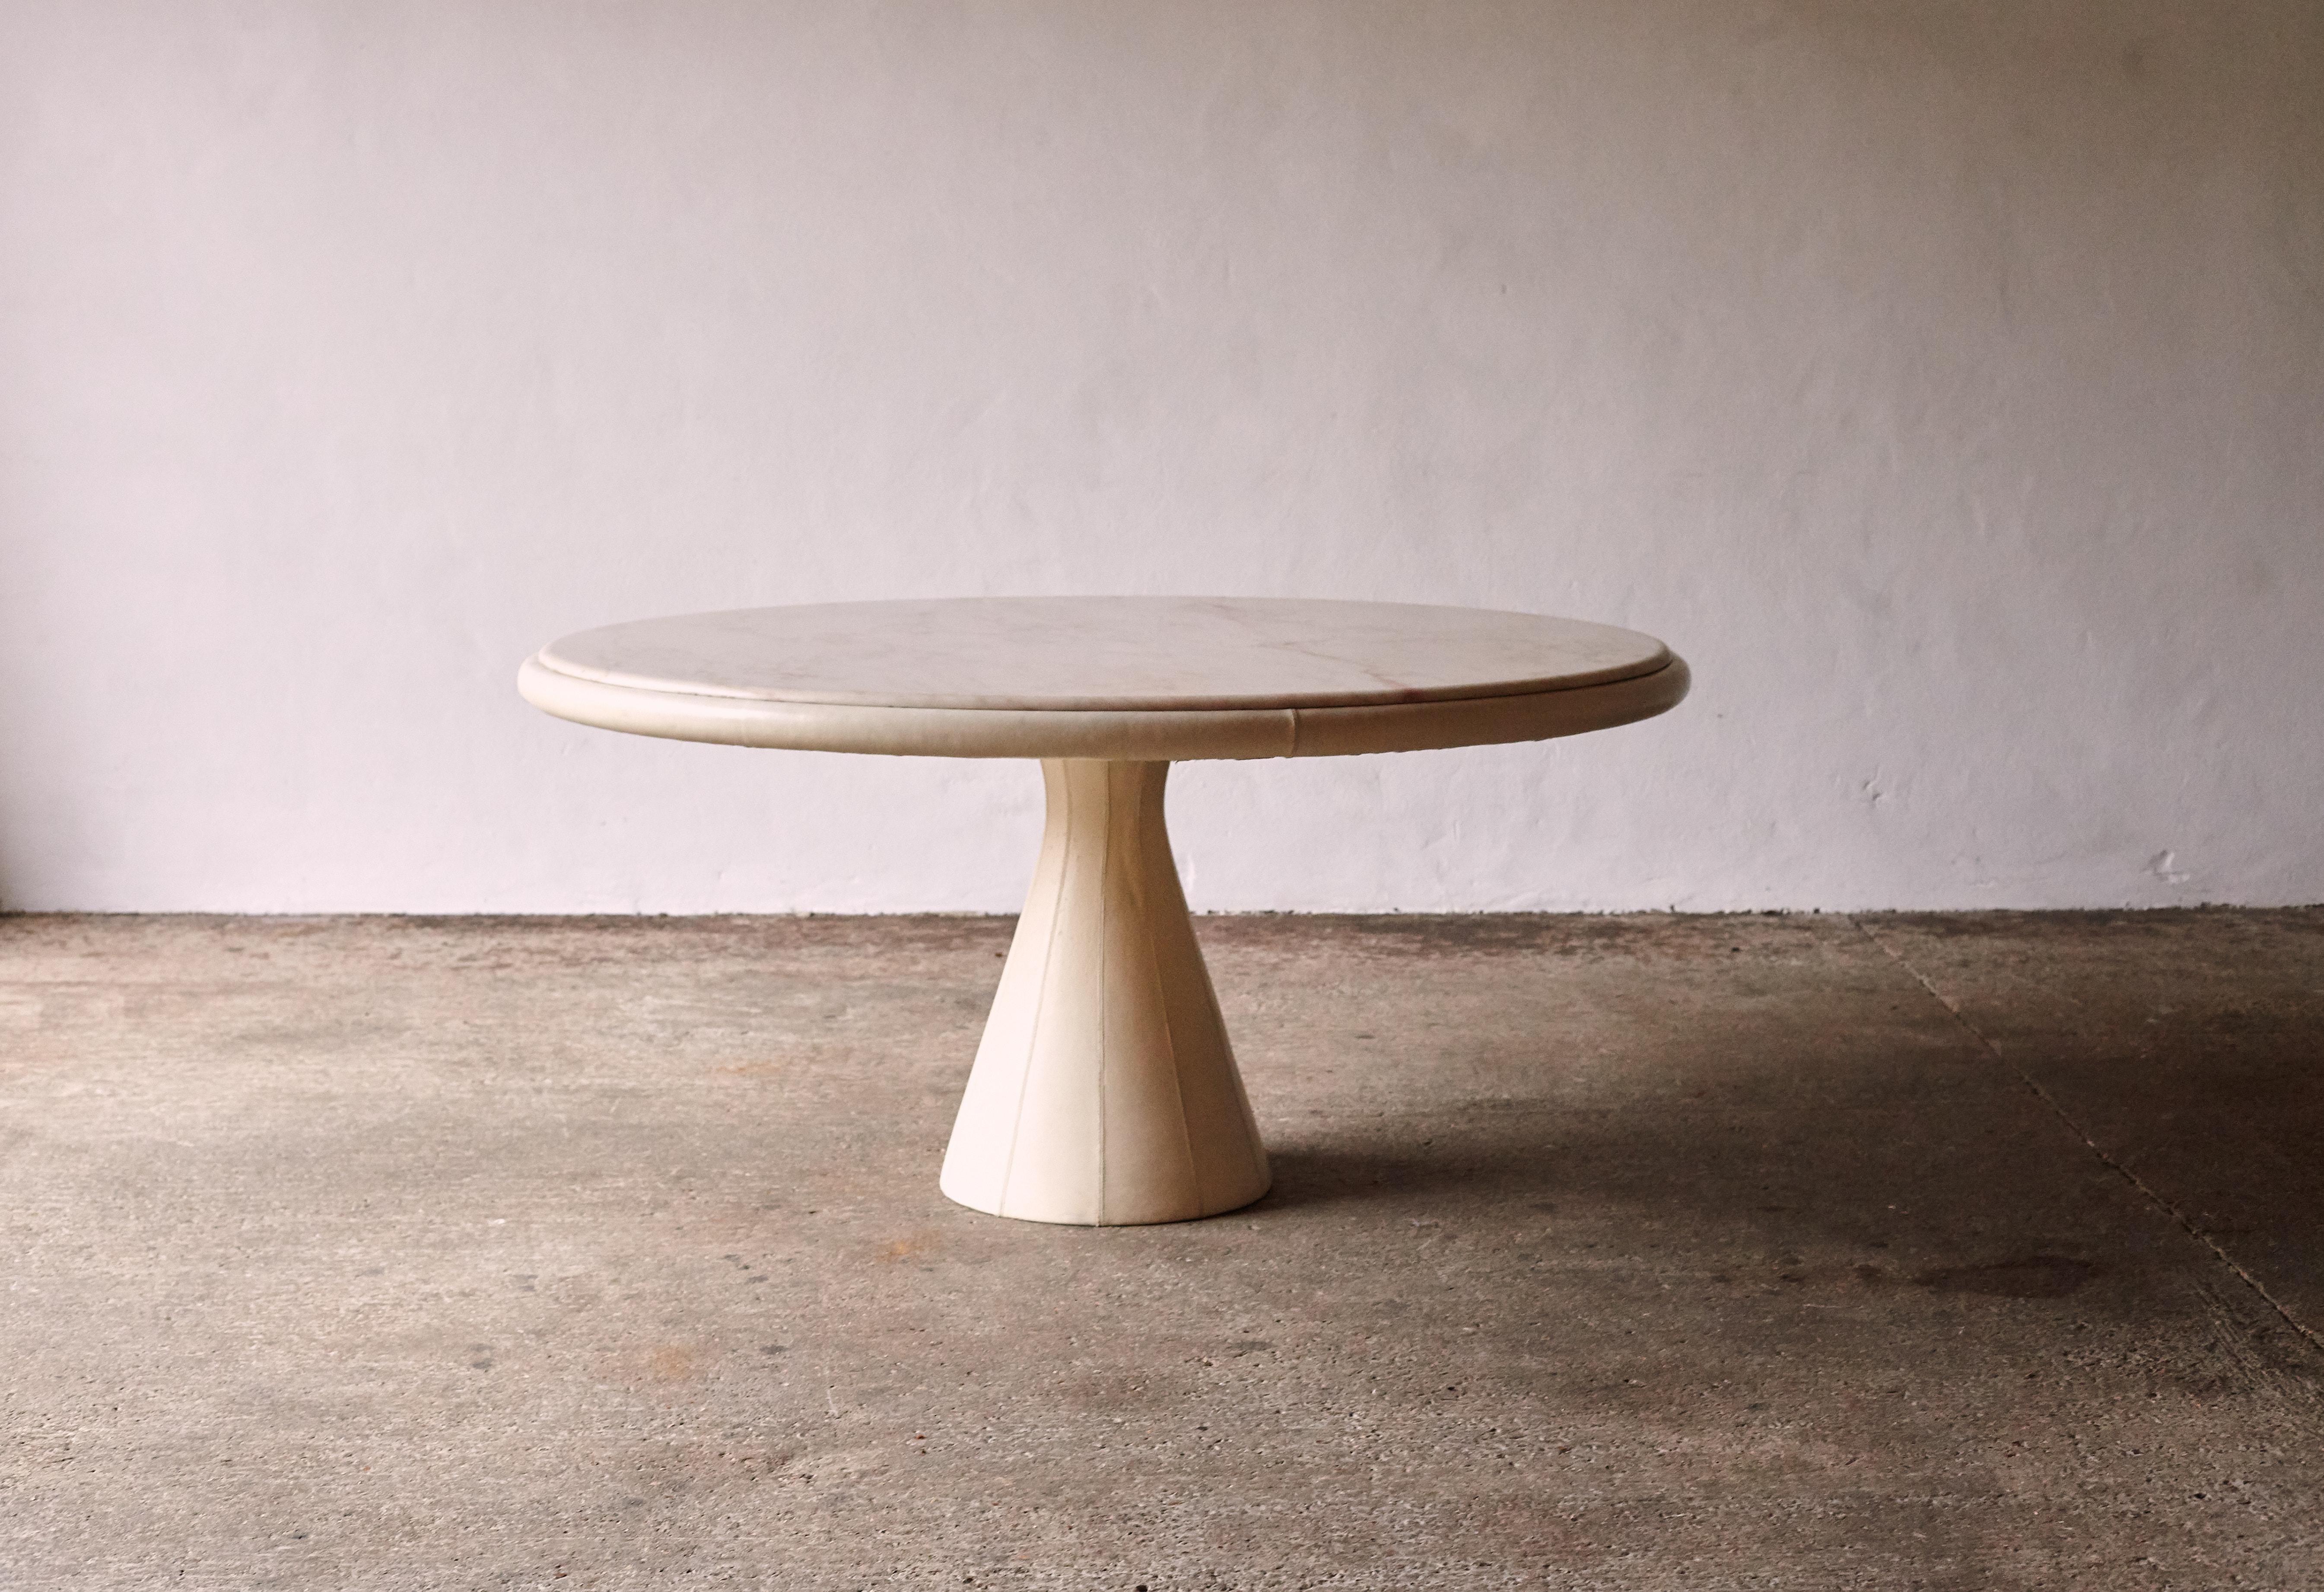 A unique leather and pink marble dining table, designed by Marzio Cecchi in the 1970s for the Hotel Moderno in Italy and produced by Studio Most. Measures: 76cm x 155cm.